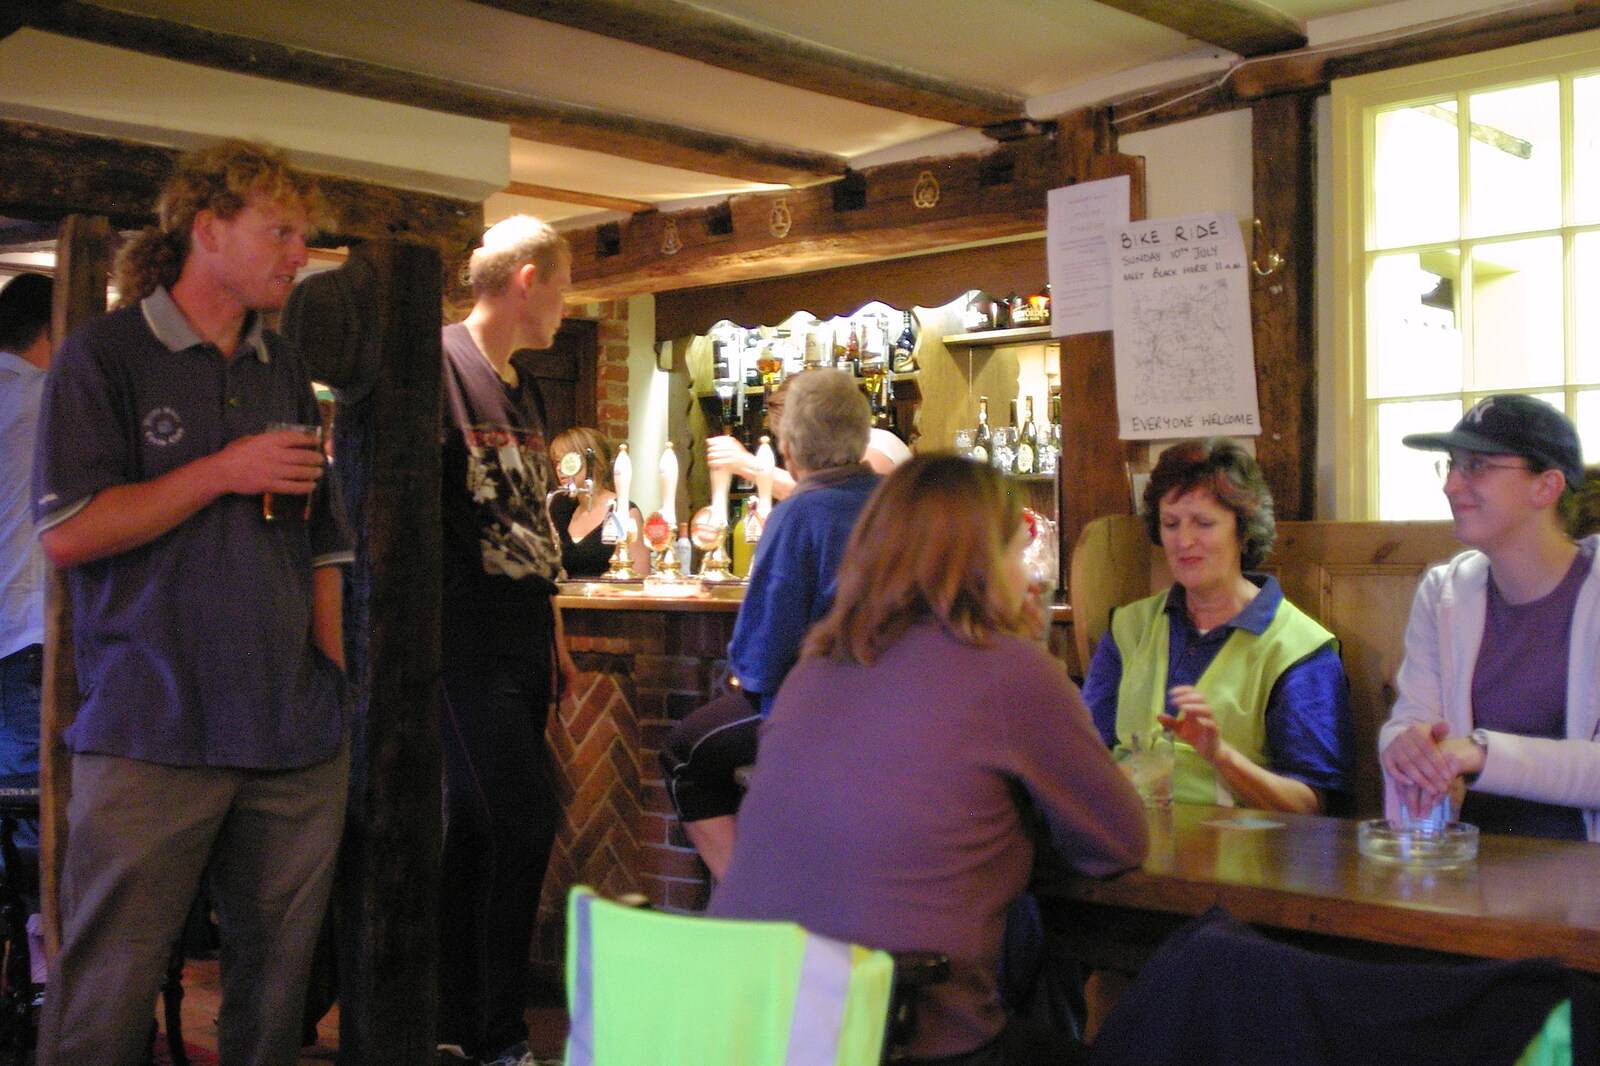 In the Thorndon Black Horse, the previous Thursday from The BSCC Charity Bike Ride, Walberswick, Suffolk - 9th July 2005